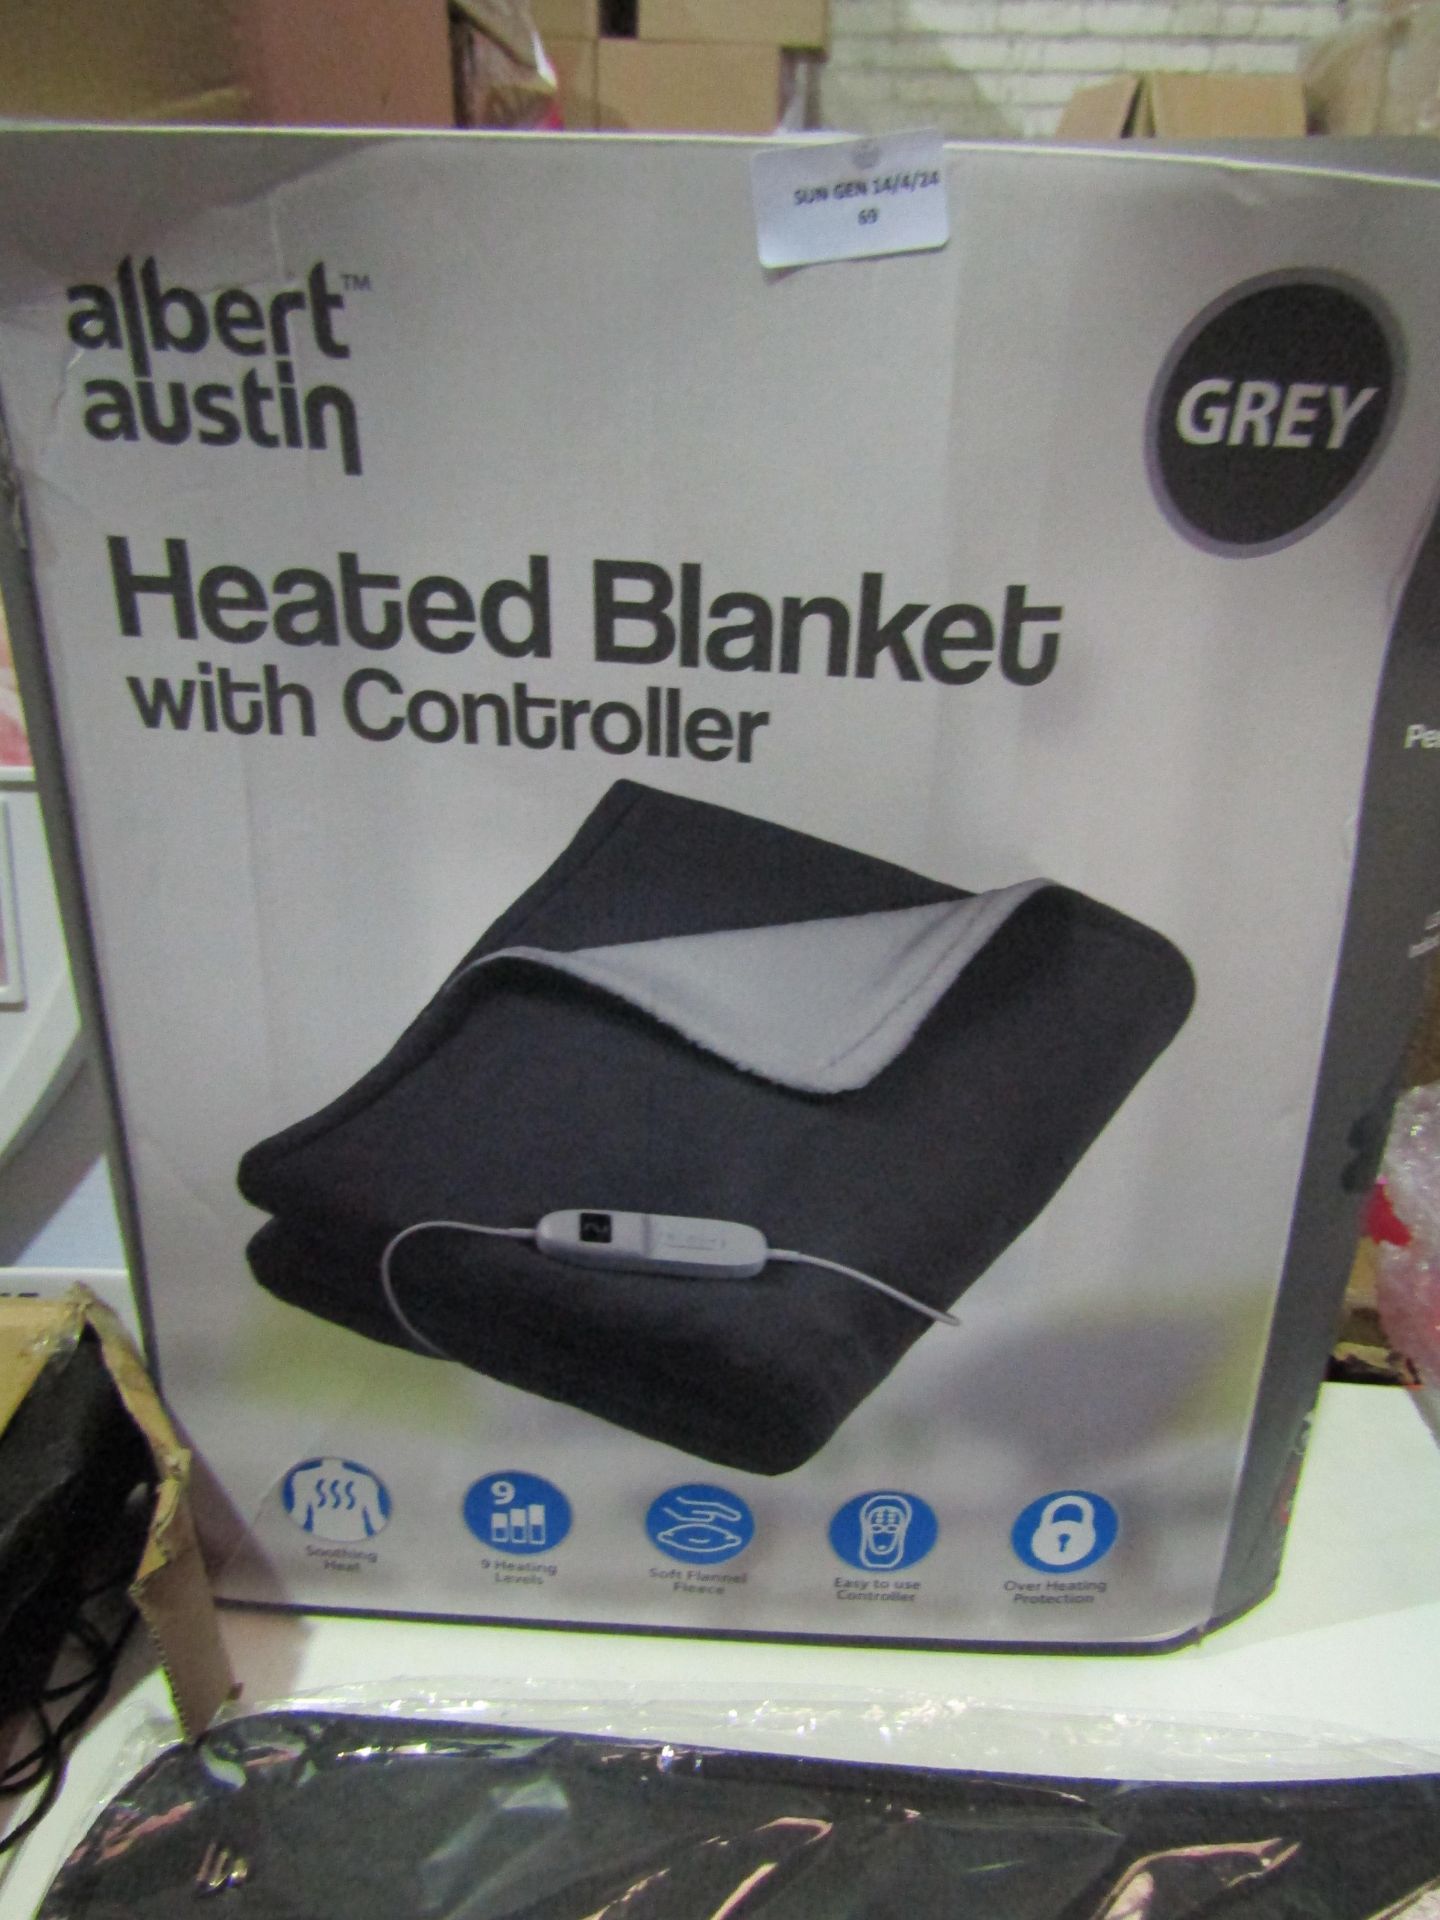 Albert Austin Heated Blanket With Controller, Grey - Unchecked & Boxed.